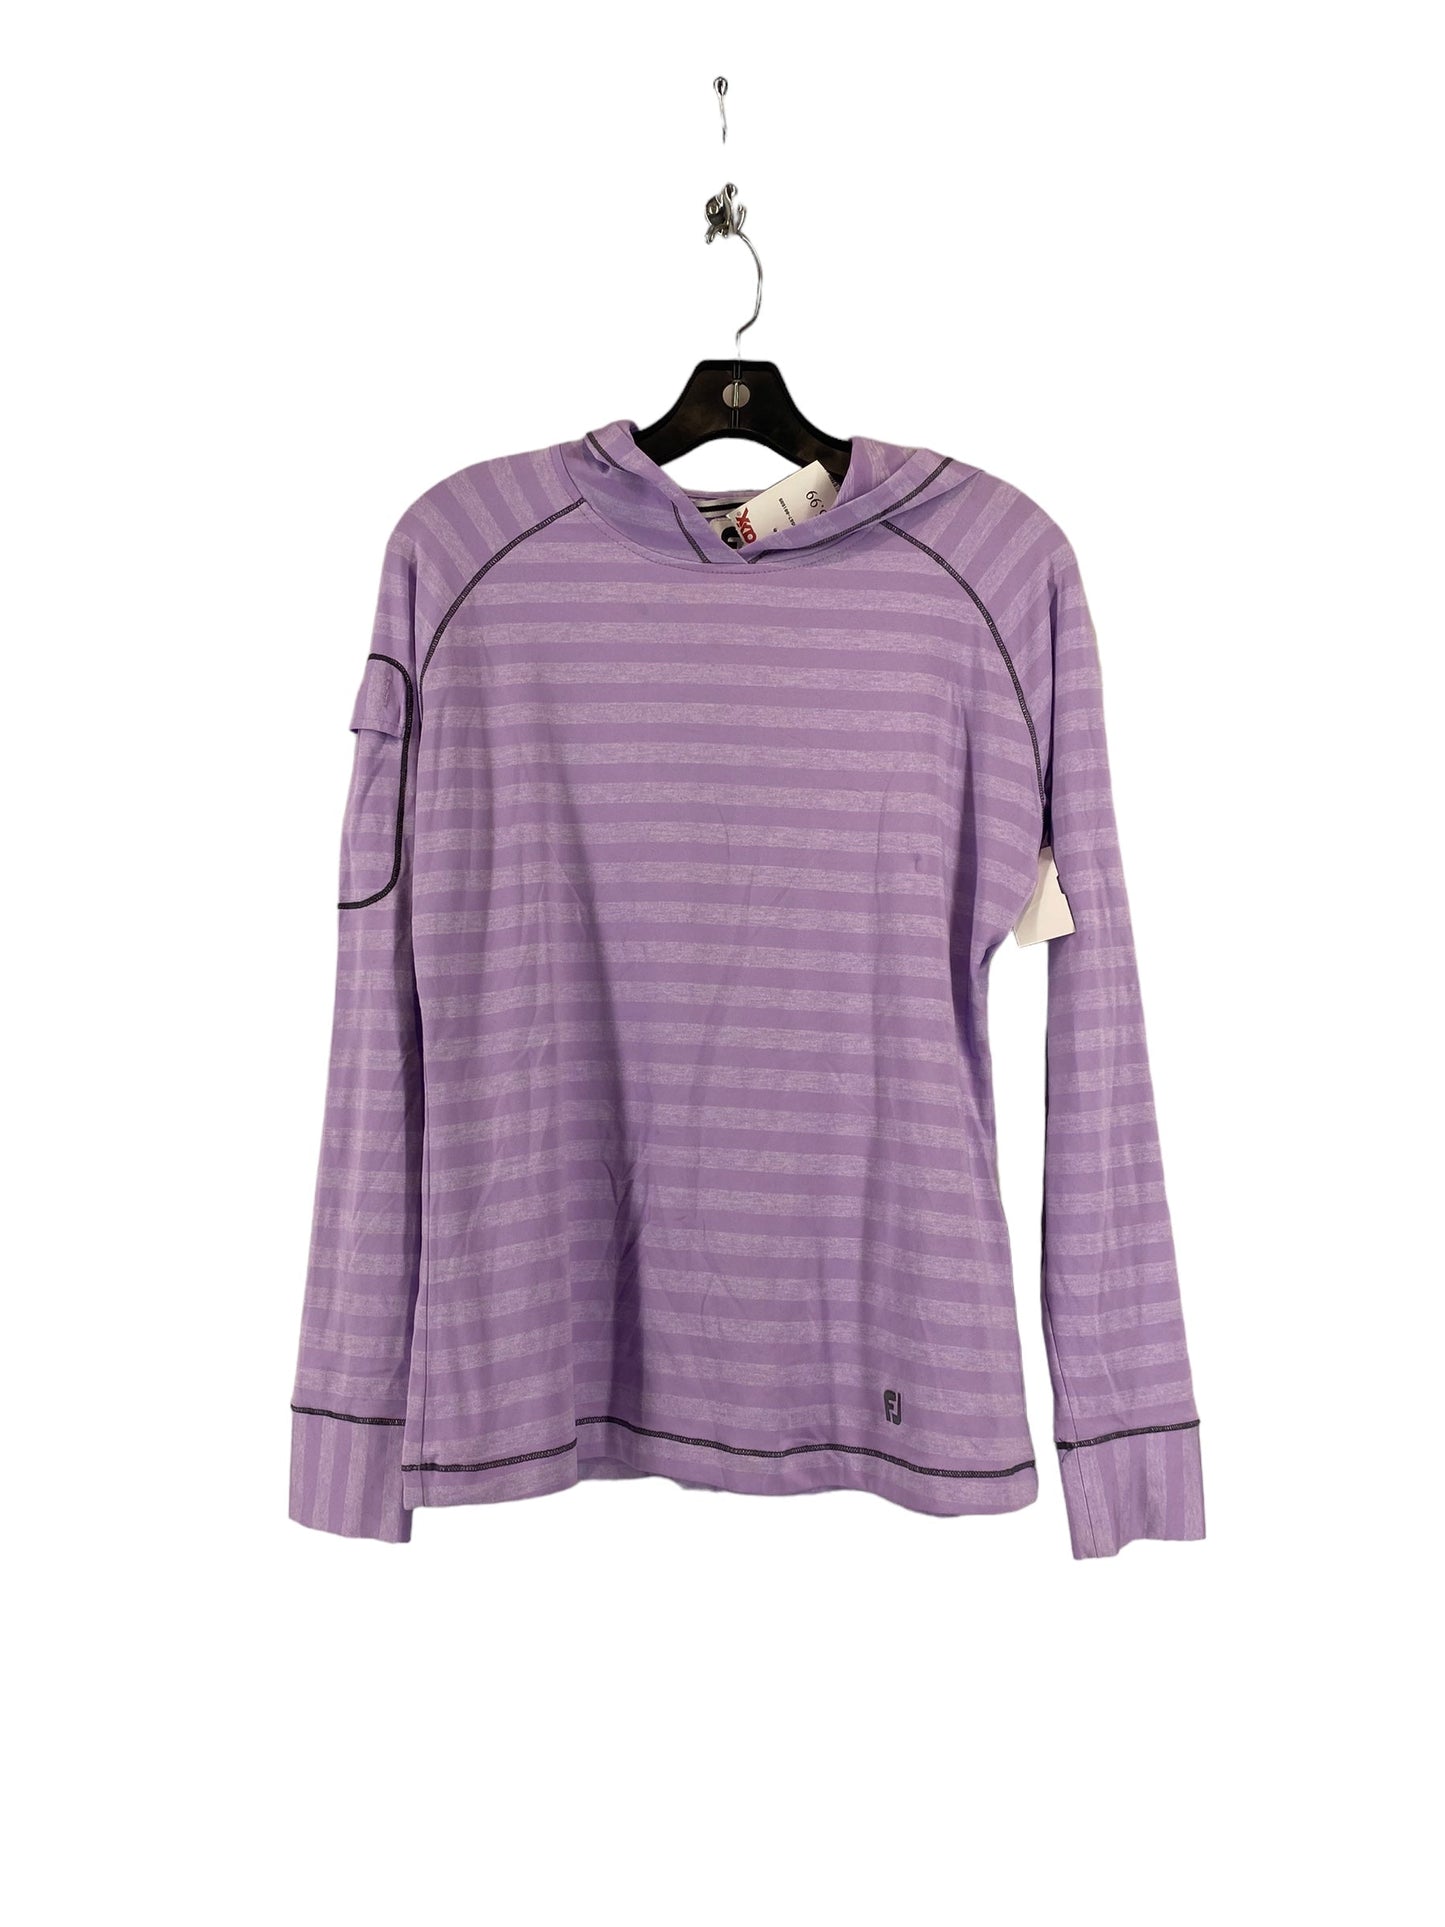 Athletic Top Long Sleeve Collar By Clothes Mentor  Size: M